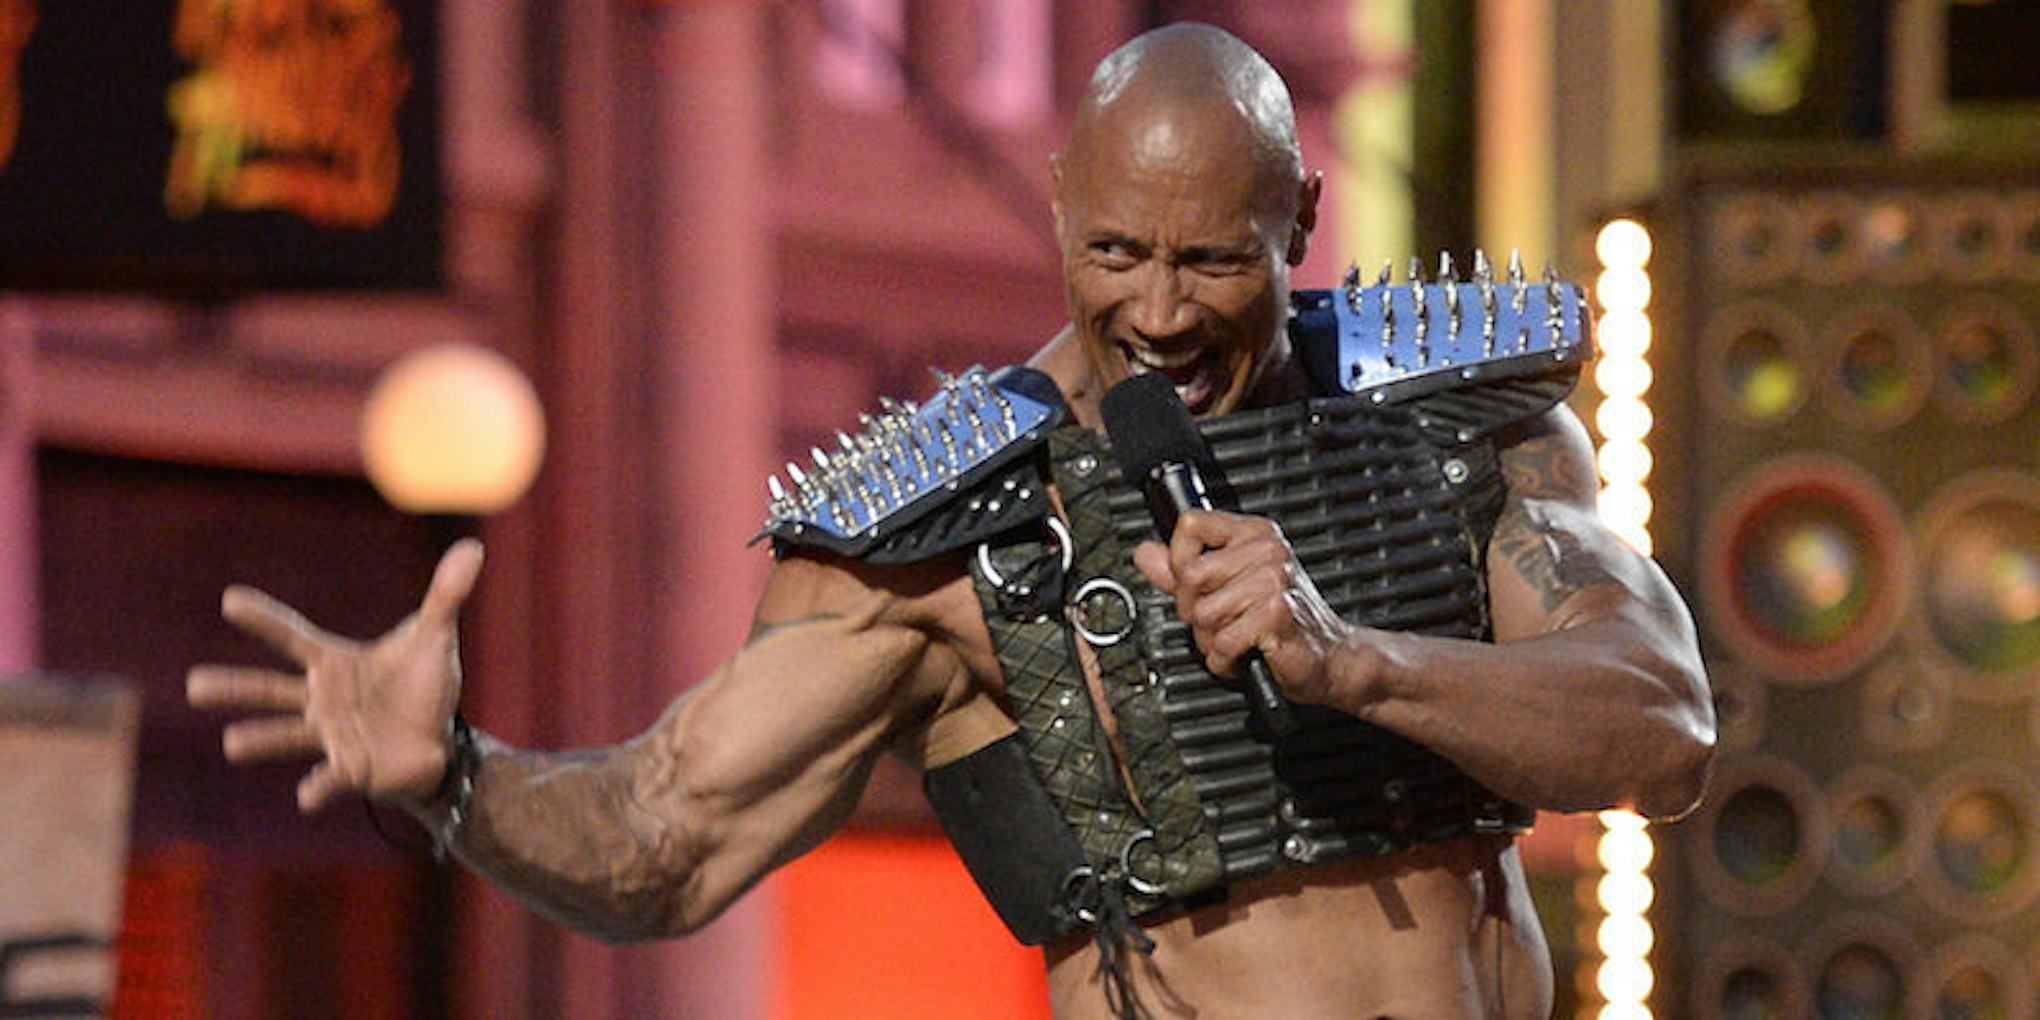 No One Could Stop Talking About The Rock S Bulge At The Mtv Movie Awards